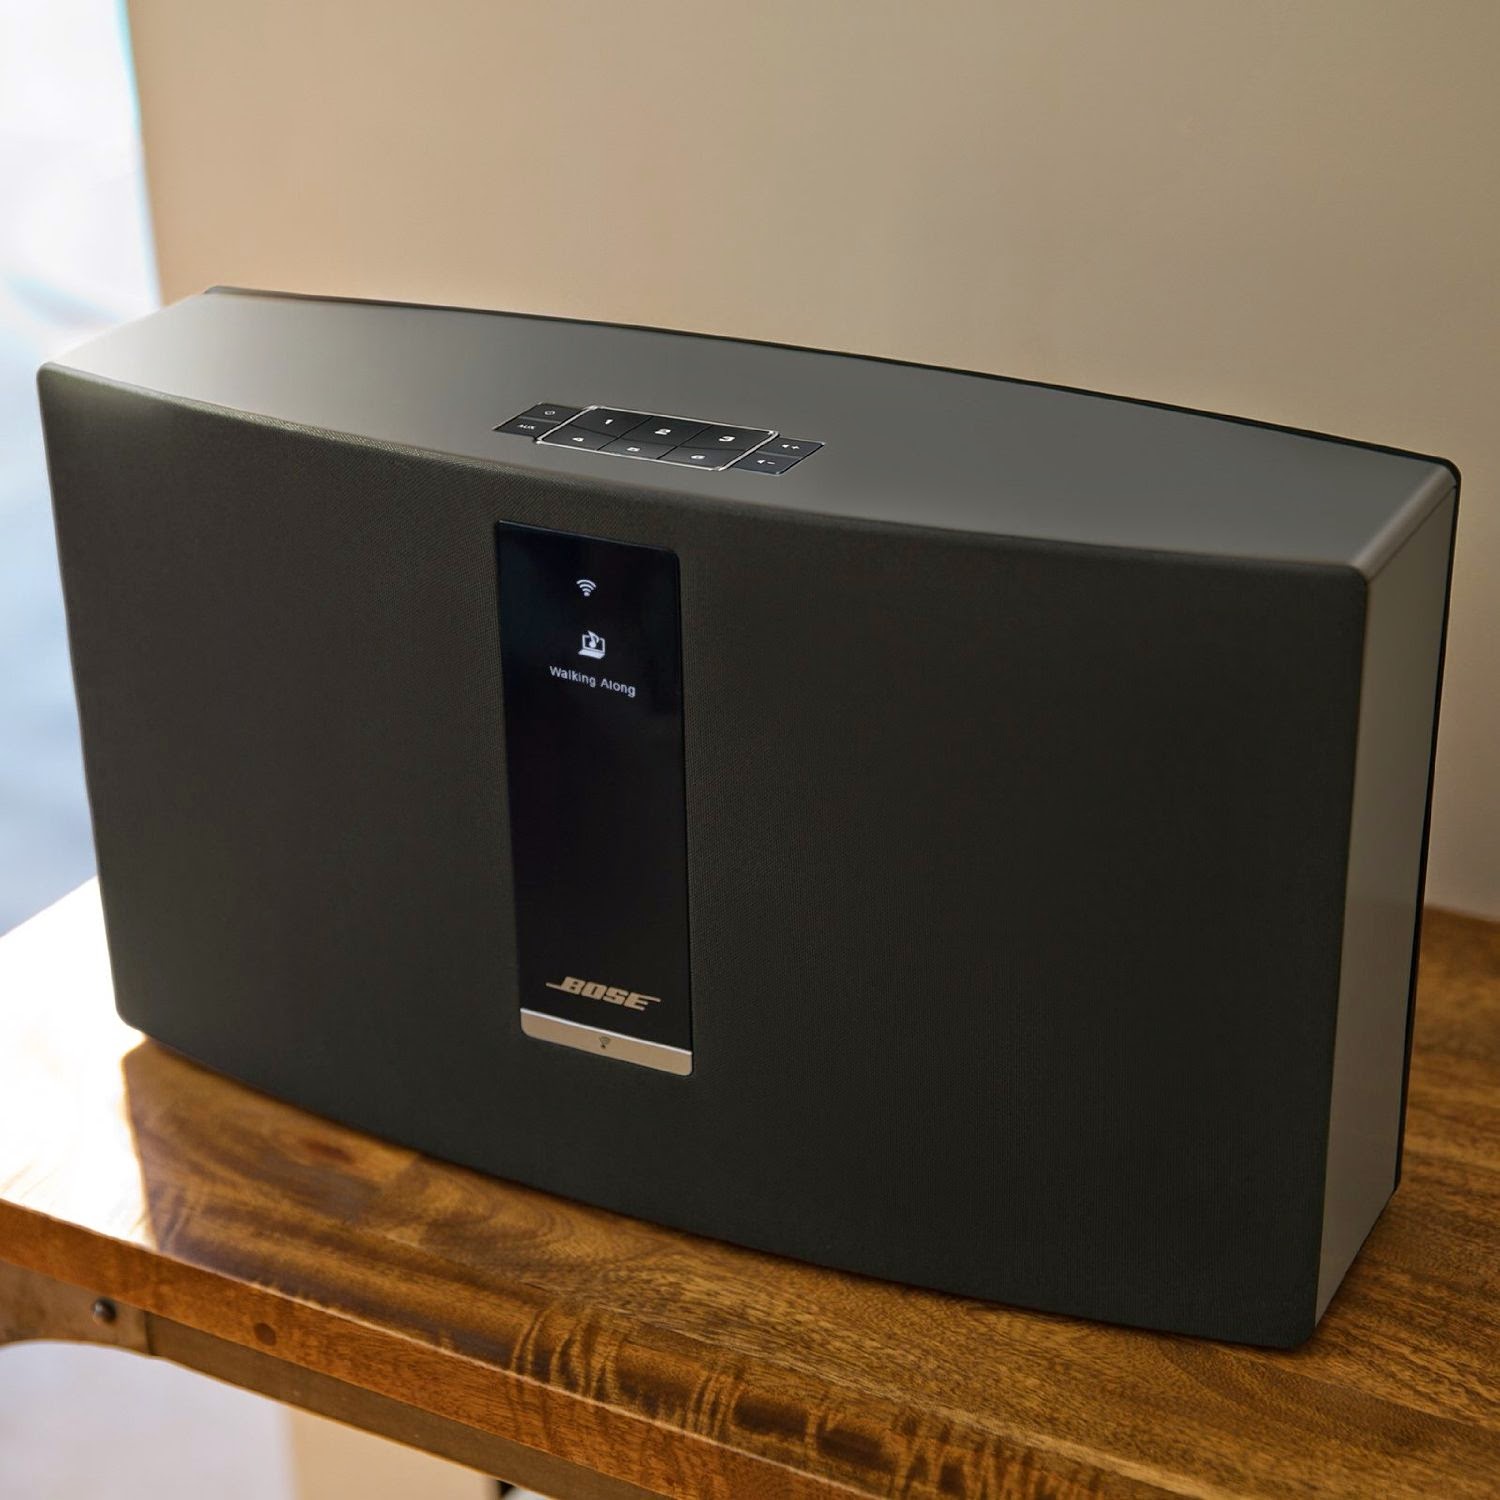 Bose SoundTouch 30 Series II Wireless Music System Review